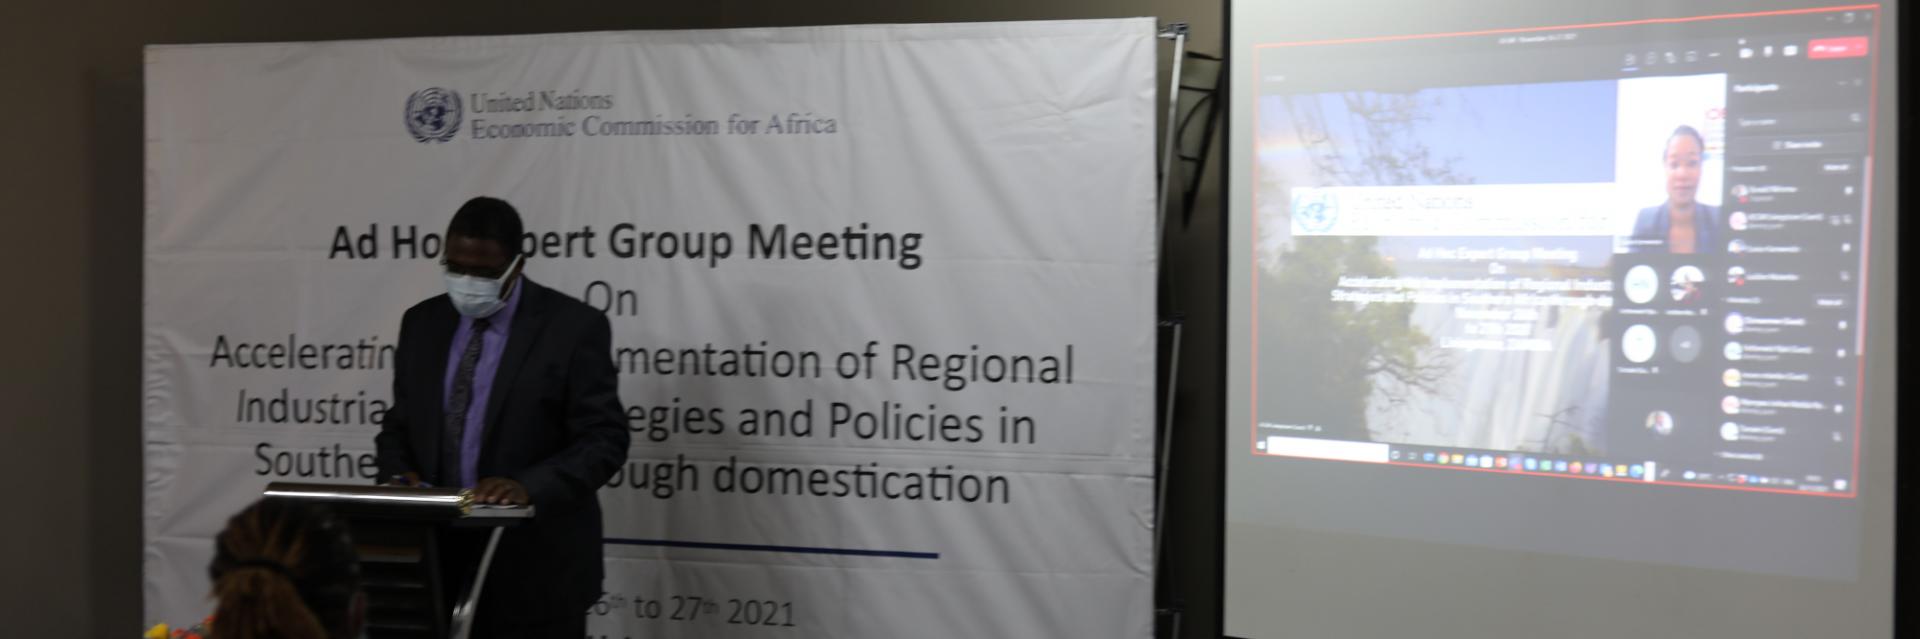 Southern Africa to accelerate implementation of regional industrialization strategies & policies